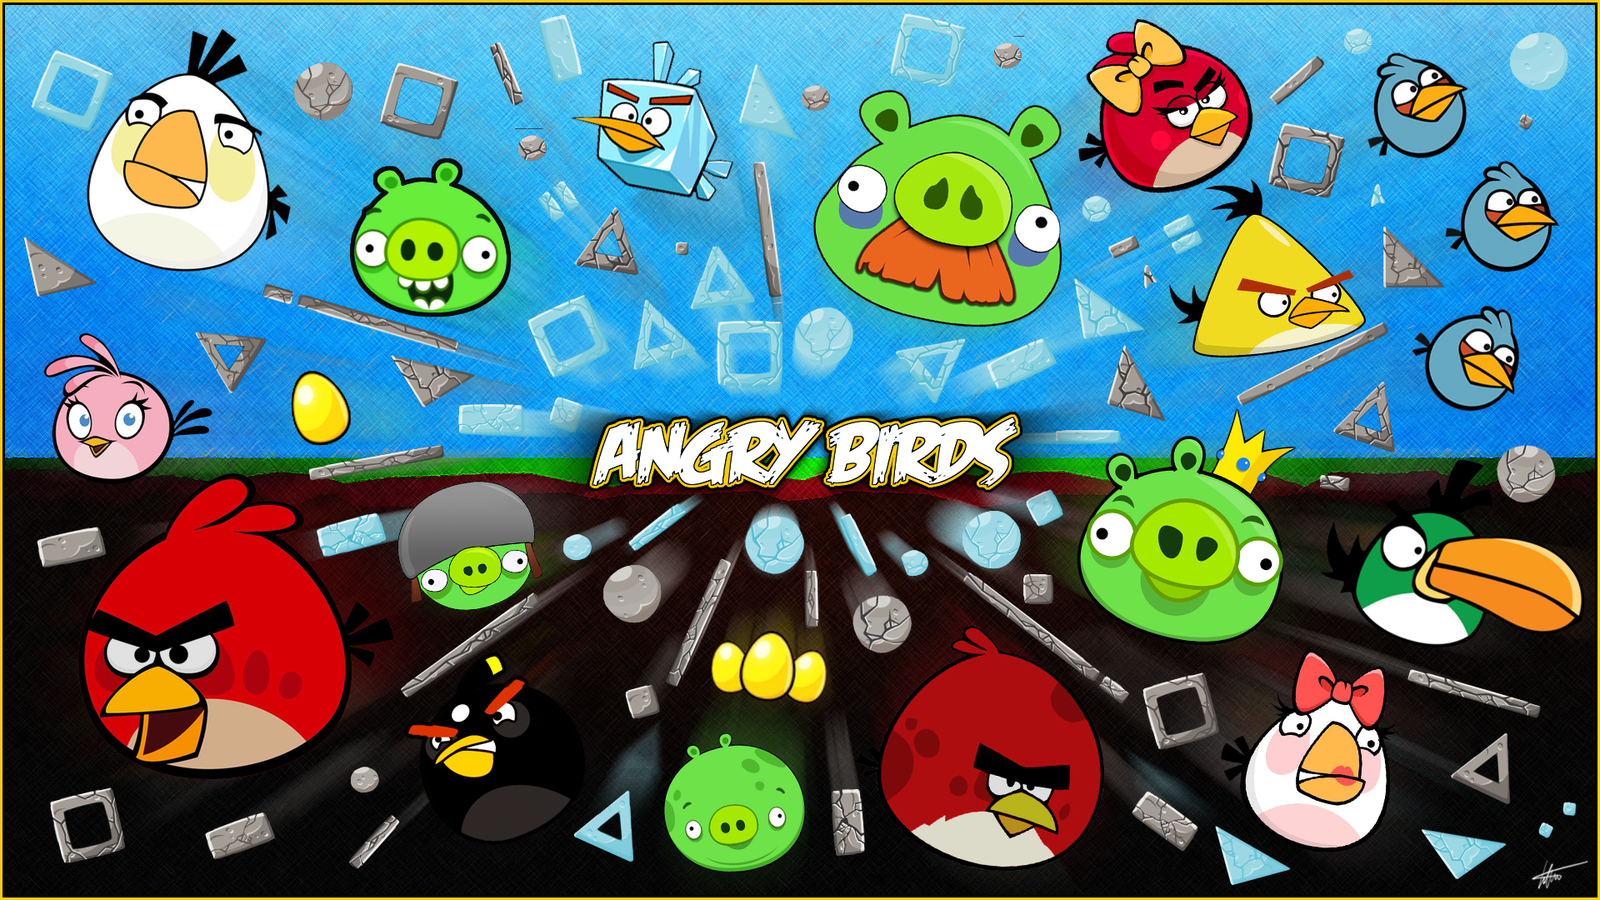 Angry Birds   Wallpaper by timdw on